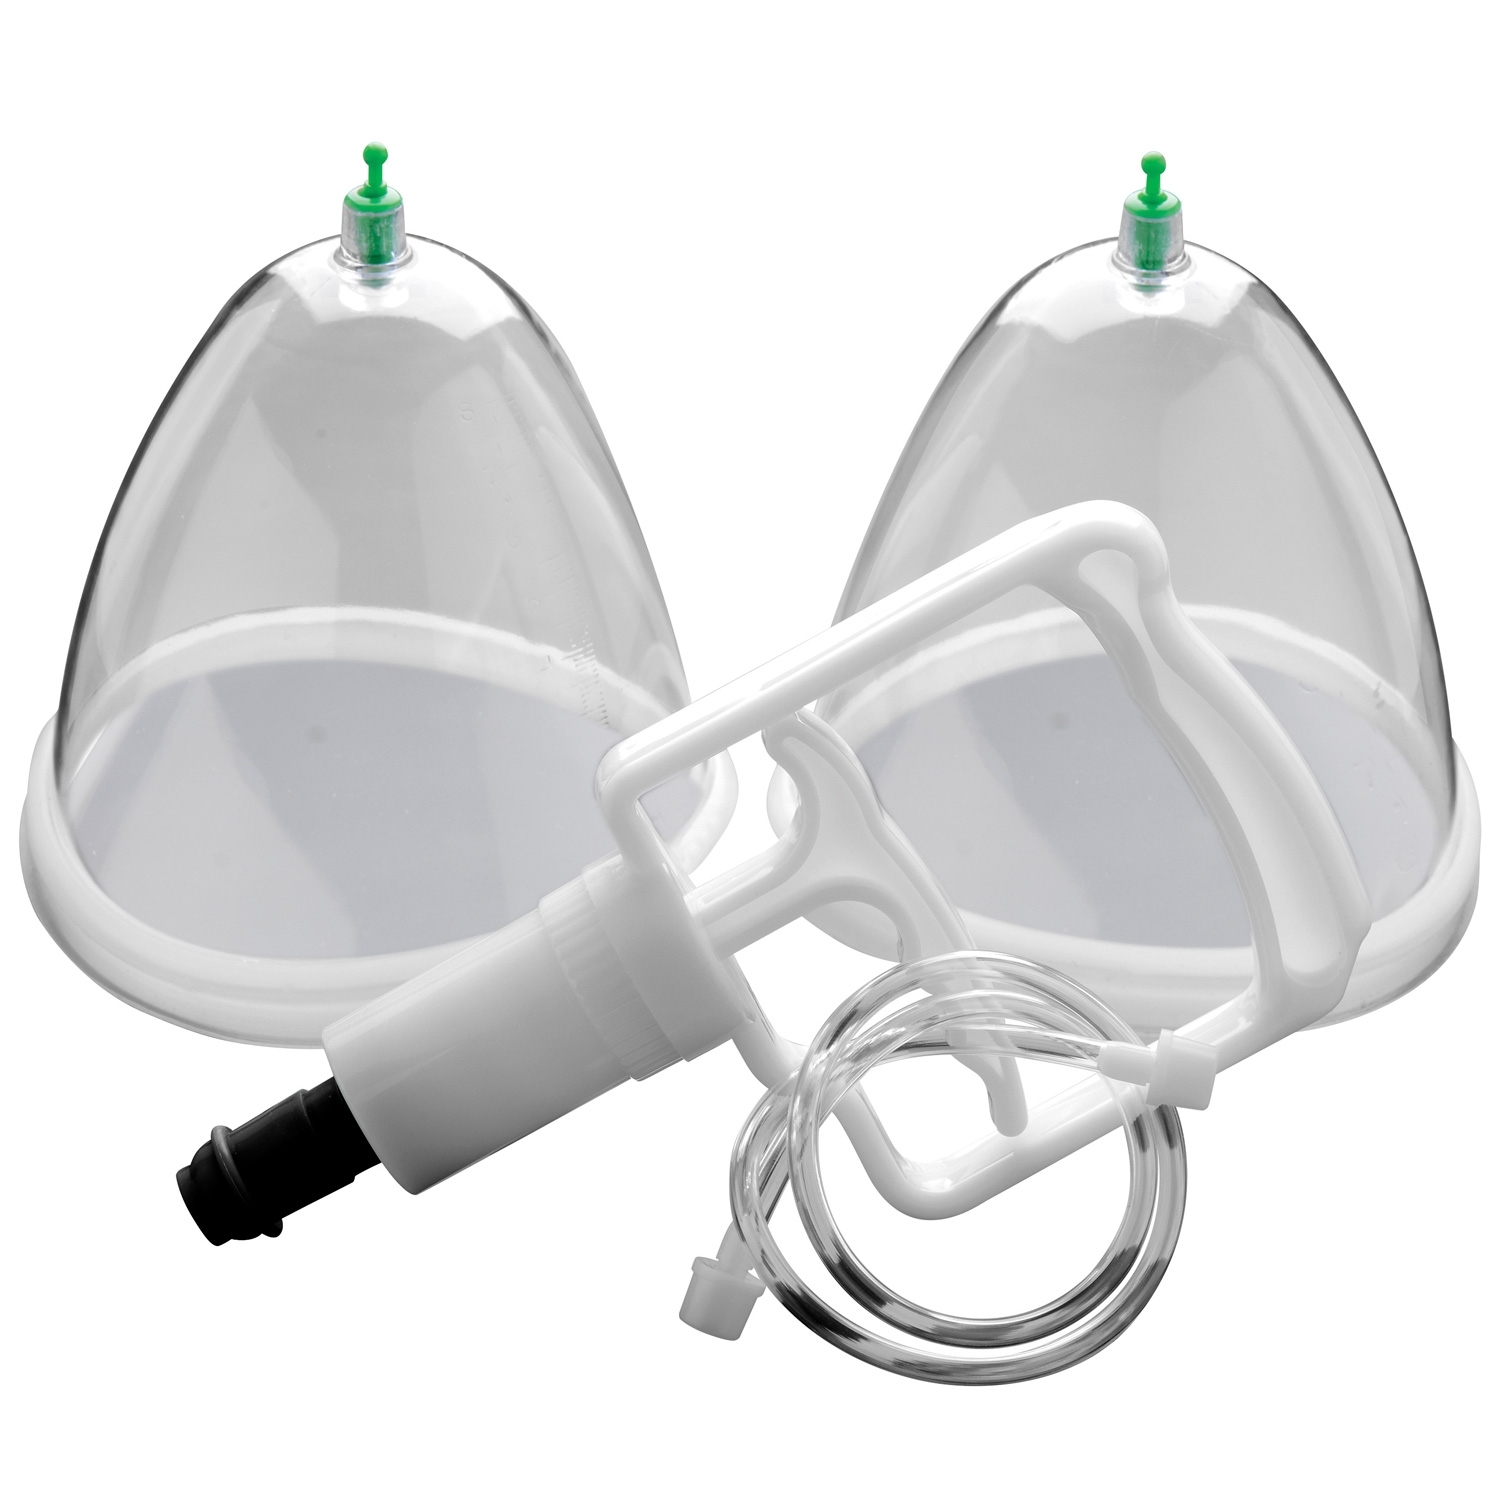 Size Matters Size Matters Breast Cupping System - Klar